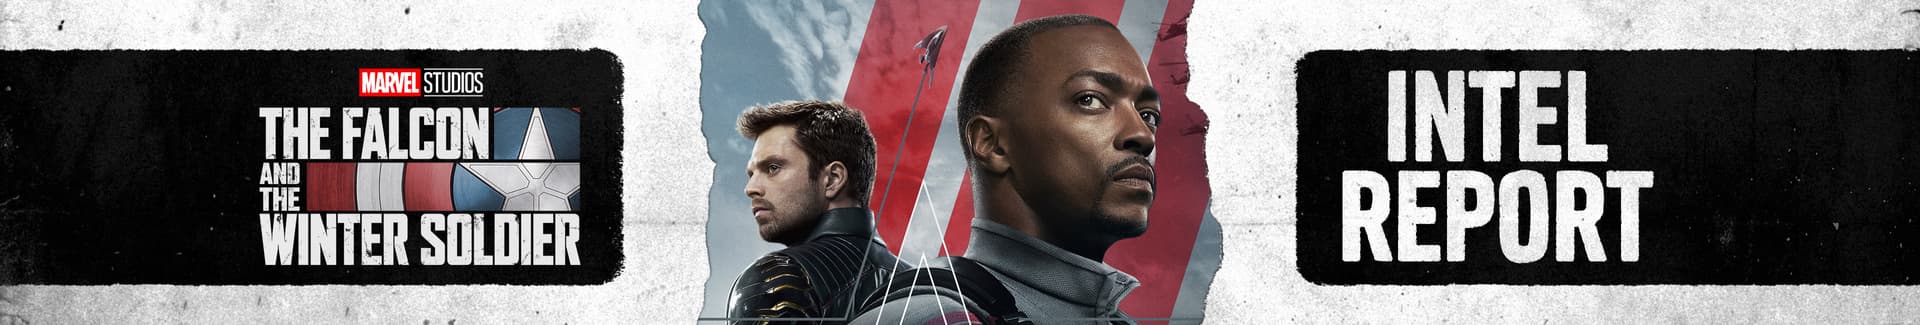 The Falcon and The Winter Soldier Episode 2 Intel Report